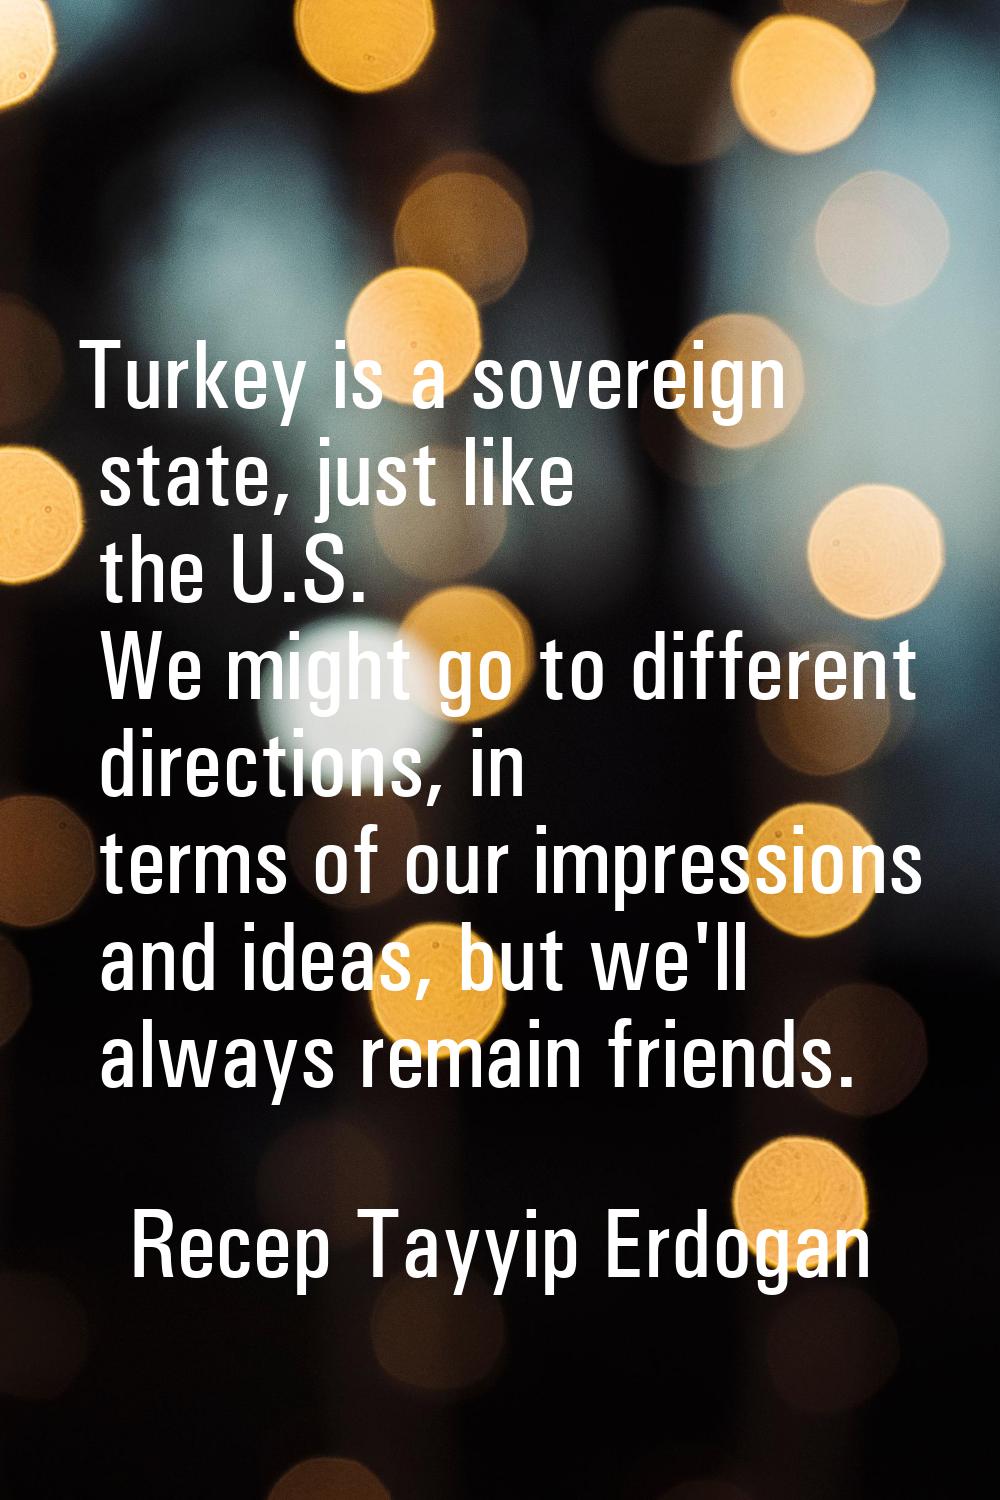 Turkey is a sovereign state, just like the U.S. We might go to different directions, in terms of ou